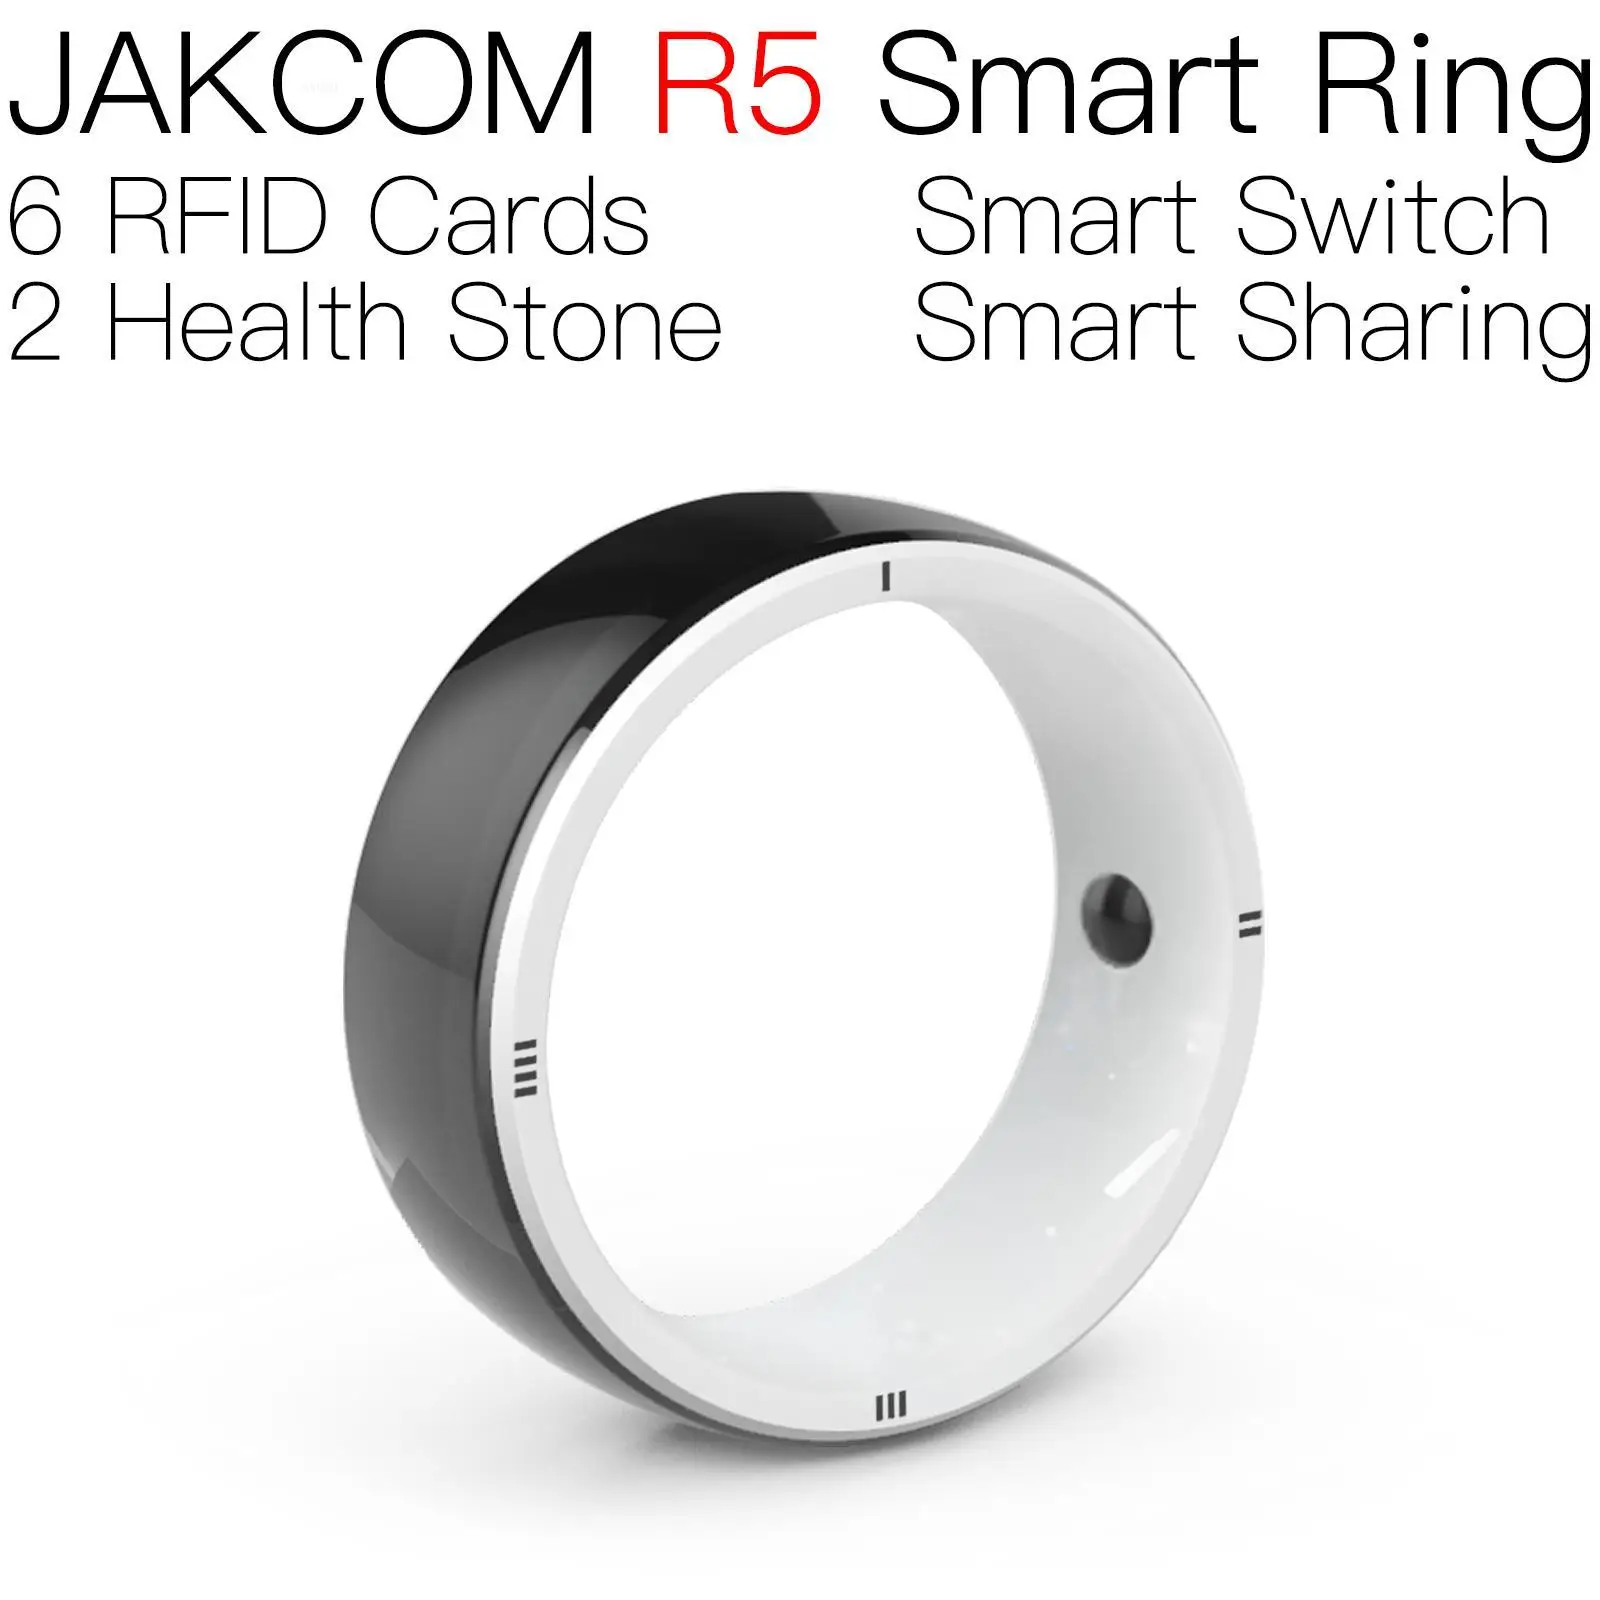 

JAKCOM R5 Smart Ring Nice than lm339 ogc dd3000 mini metal tag rfid agv 12 months 100 tags nfc for laptop reader round